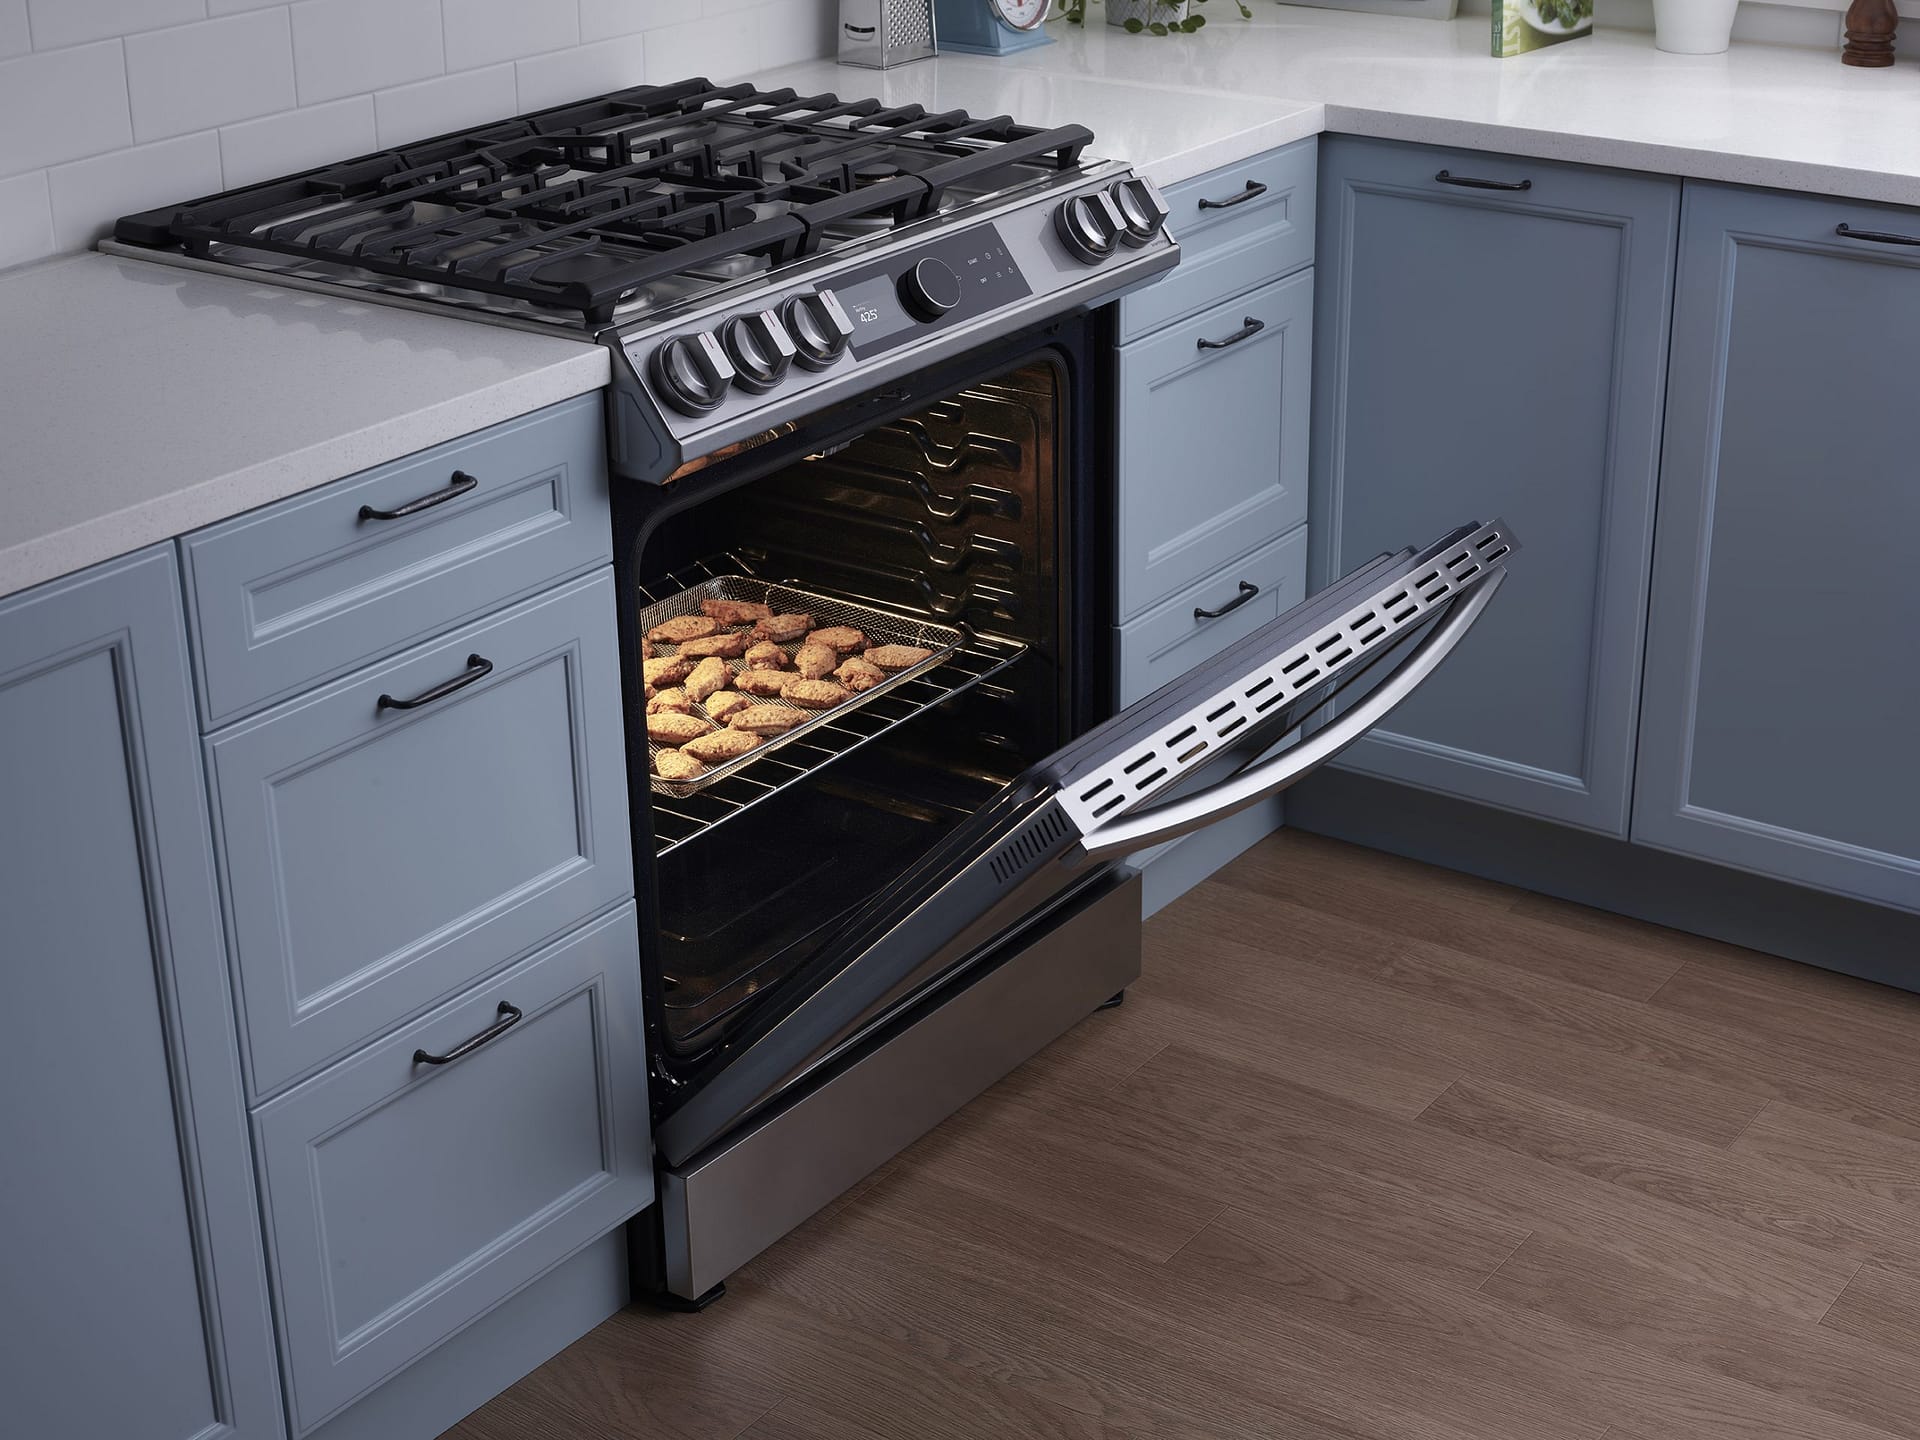 Samsung Oven Not Heating: 8 Easy Ways To Fix It Now